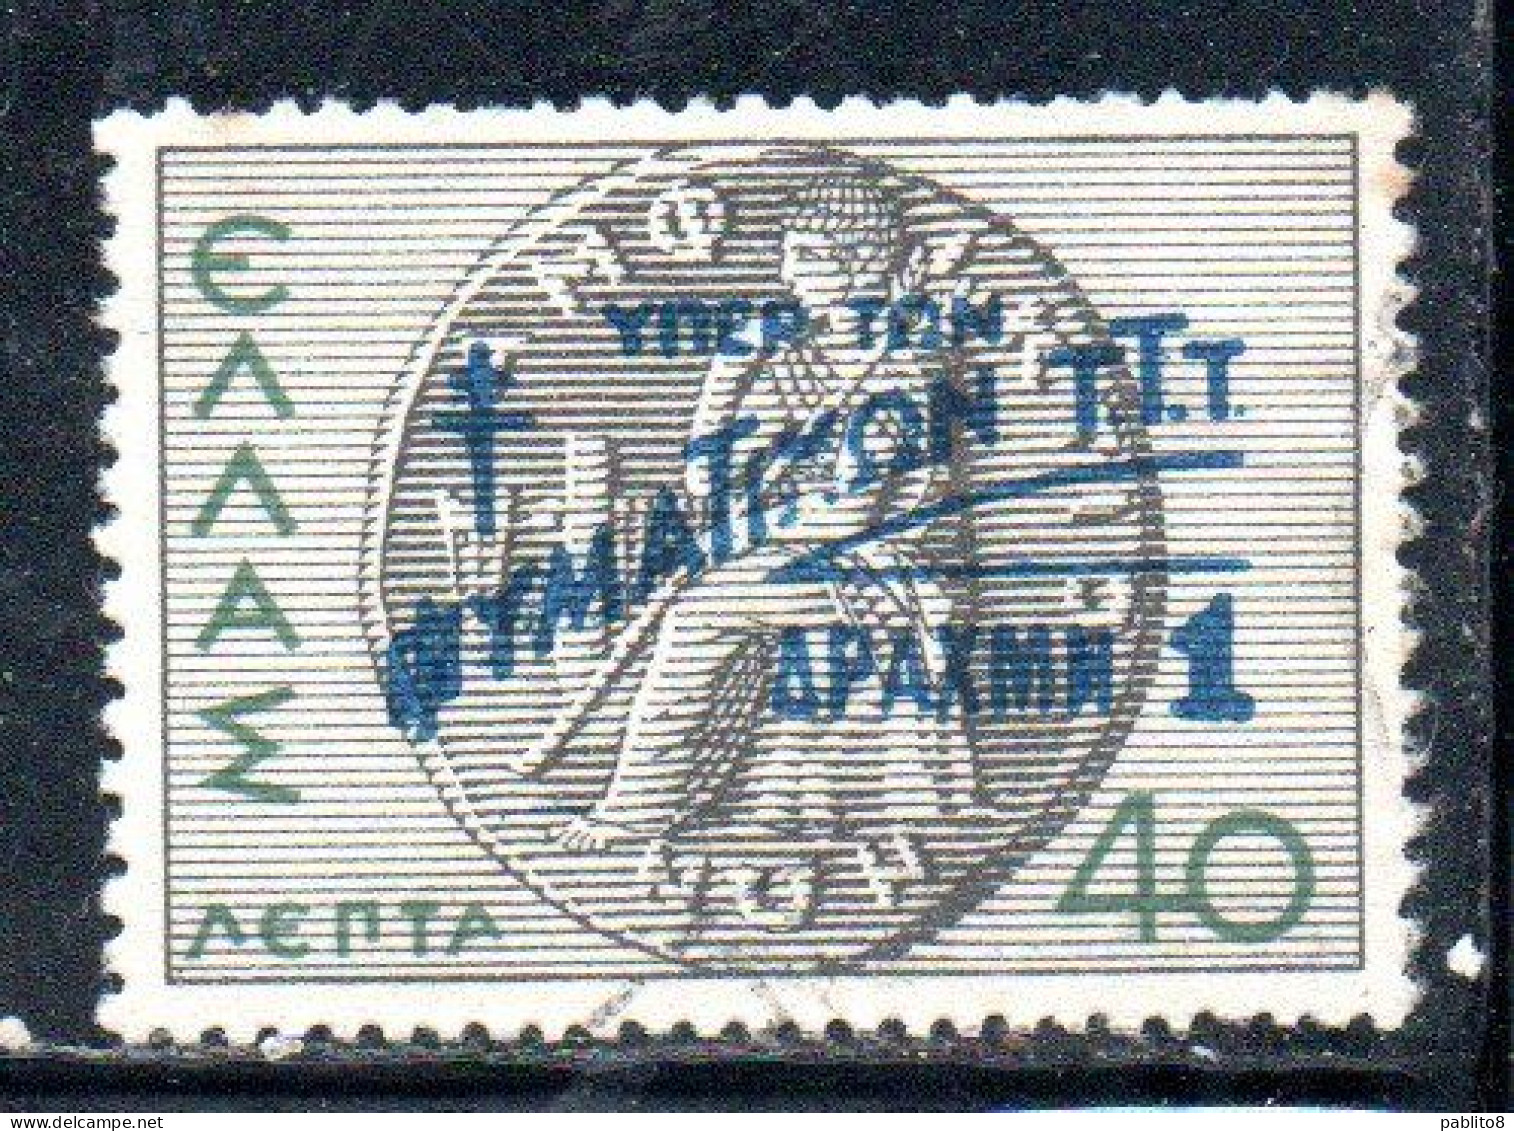 GREECE GRECIA ELLAS 1945 POSTAL TAX STAMPS TUBERCULOSIS SURCHARGED 1d On 40l USED USATO OBLITERE' - Revenue Stamps